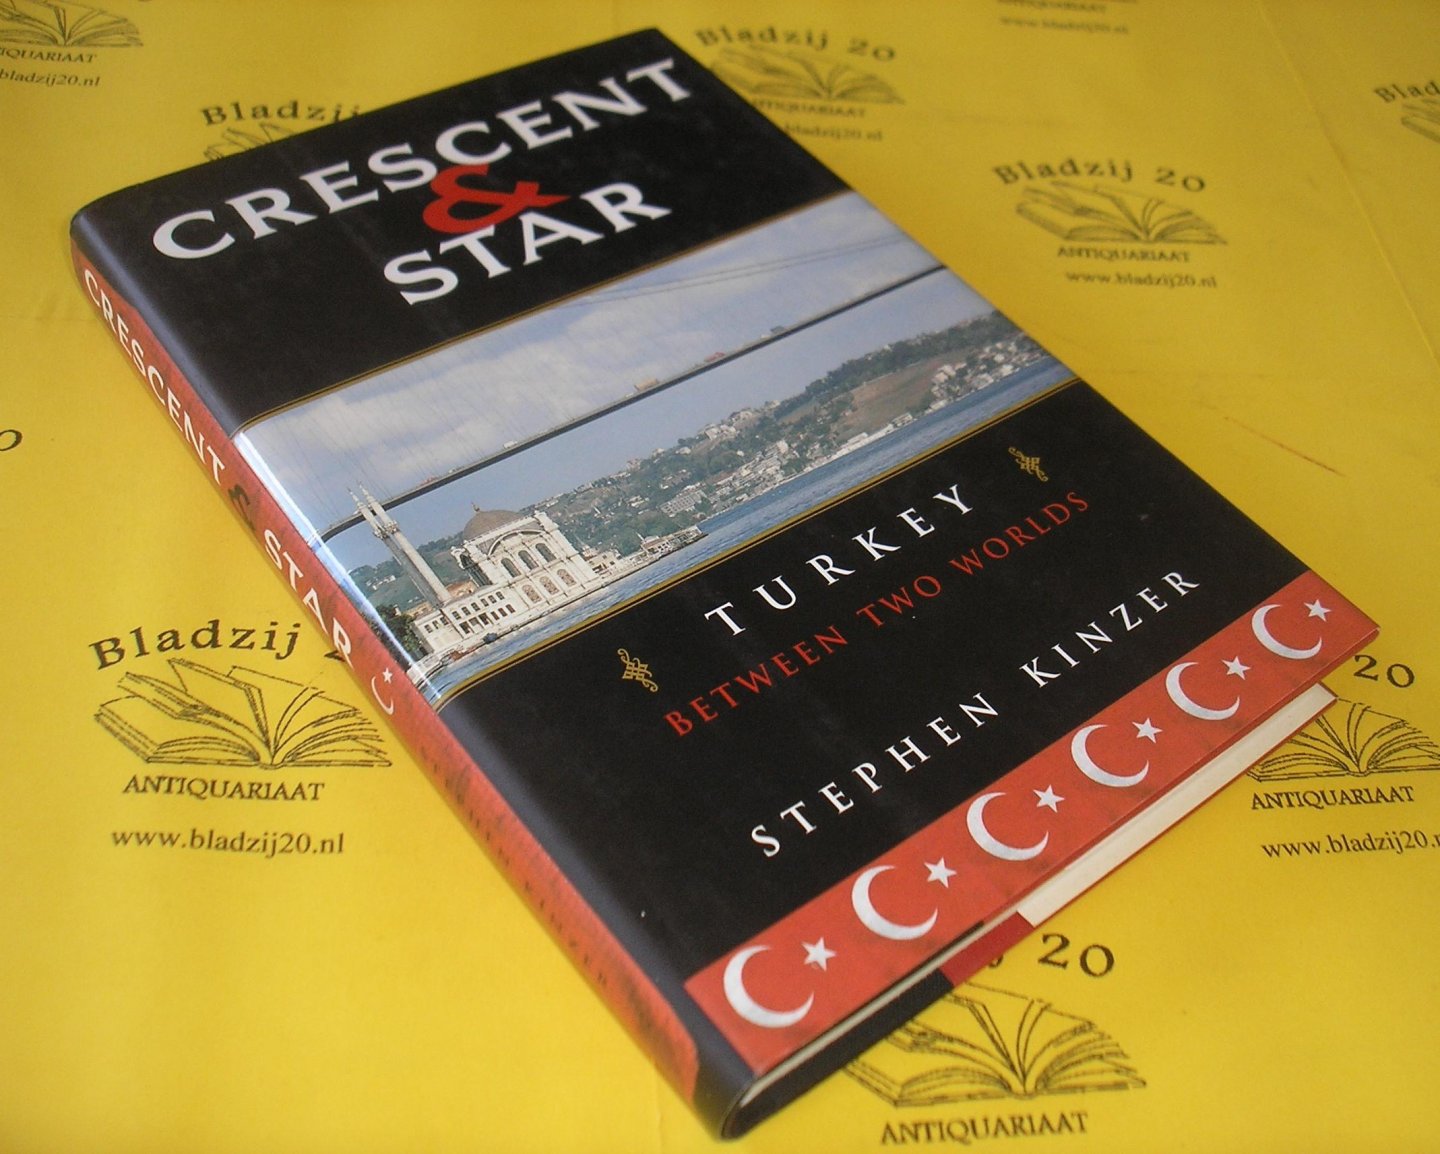 Crescent and Star by Stephen Kinzer